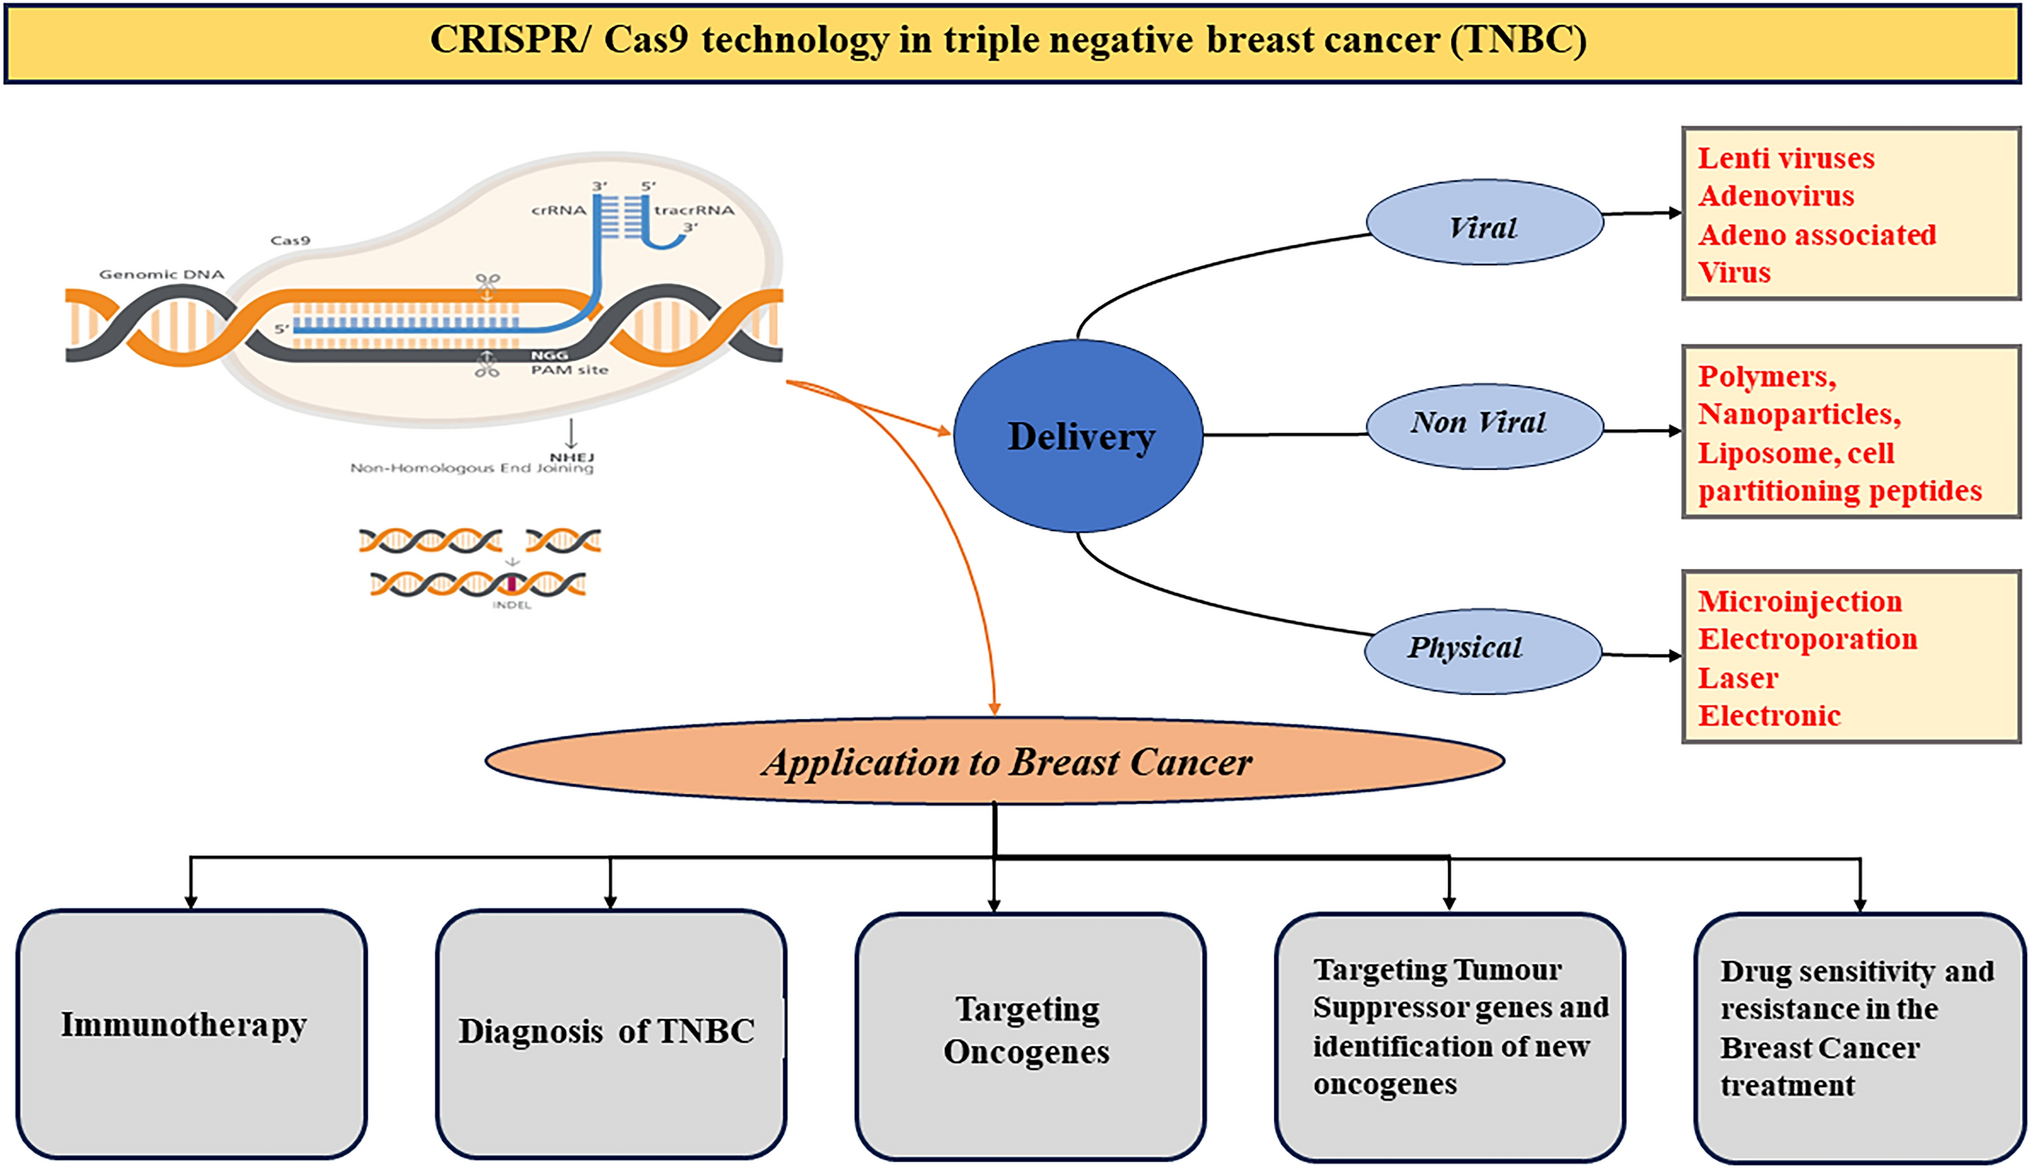 Role of CRISPR/Cas9 based therapy in breast cancer: a future direction